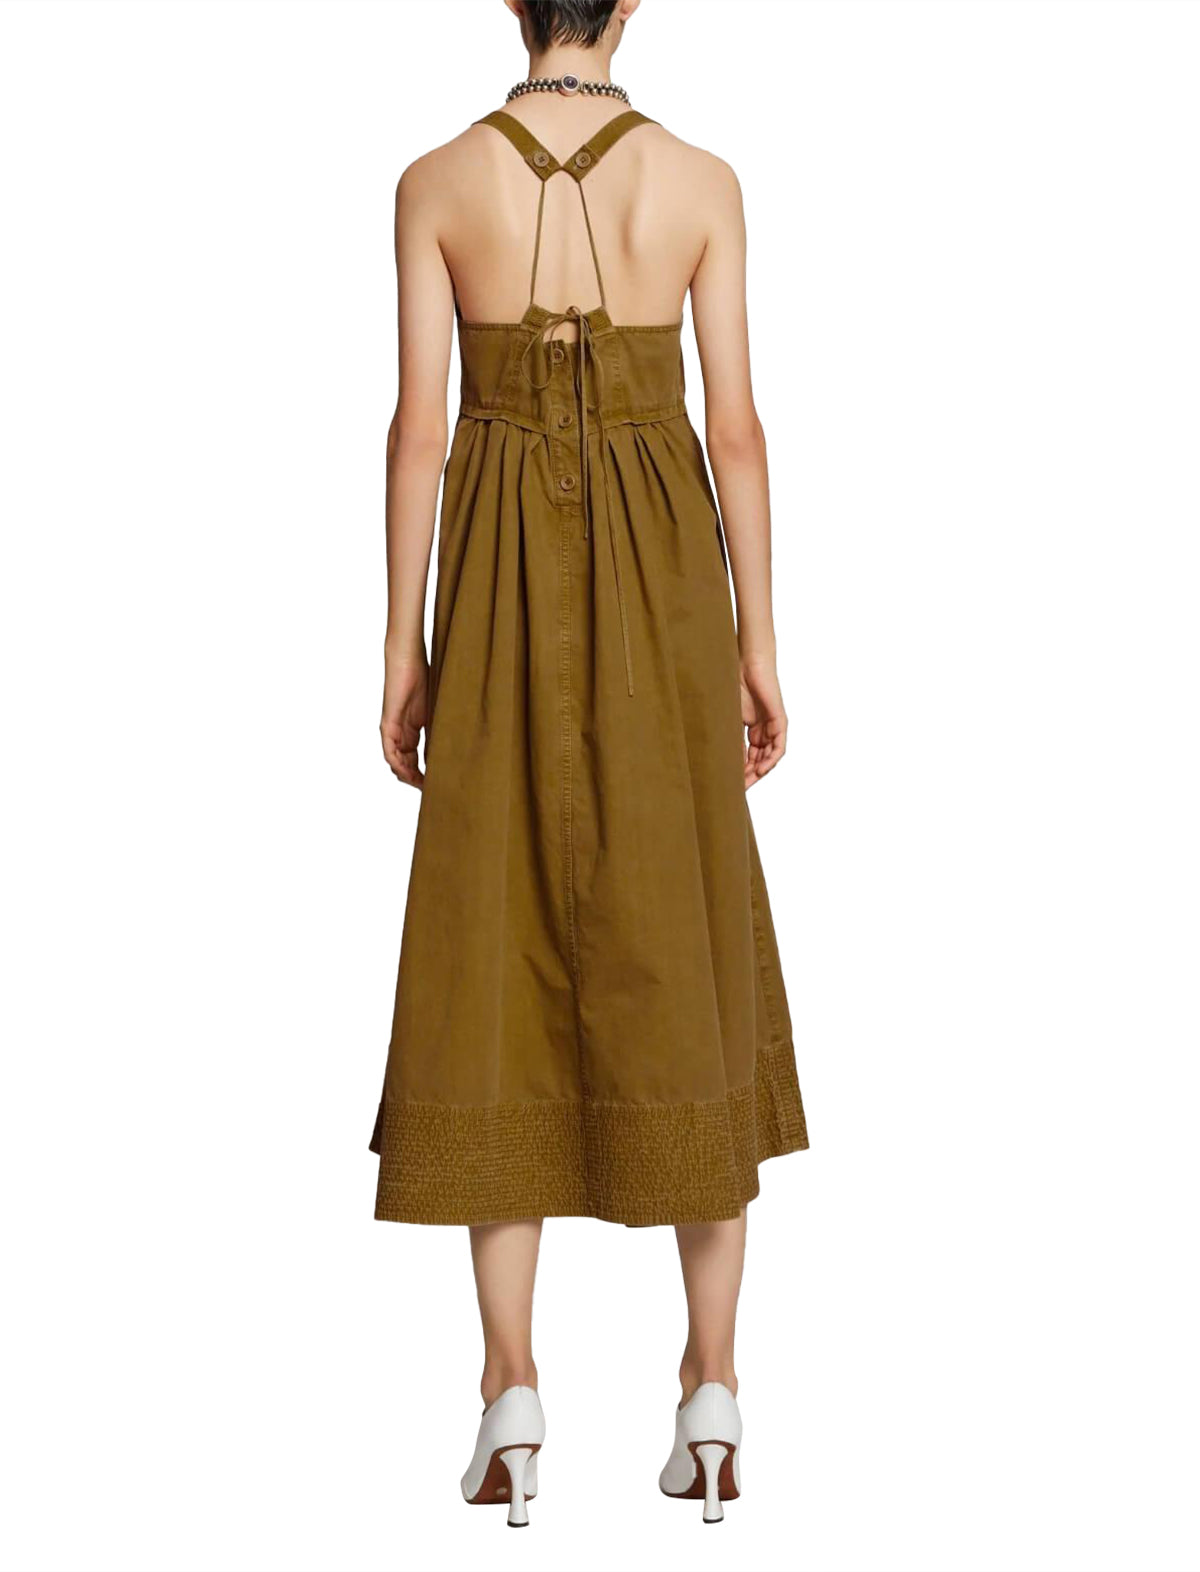 PROENZA SCHOULER WHITE LABEL Washed Apron Dress In Moss